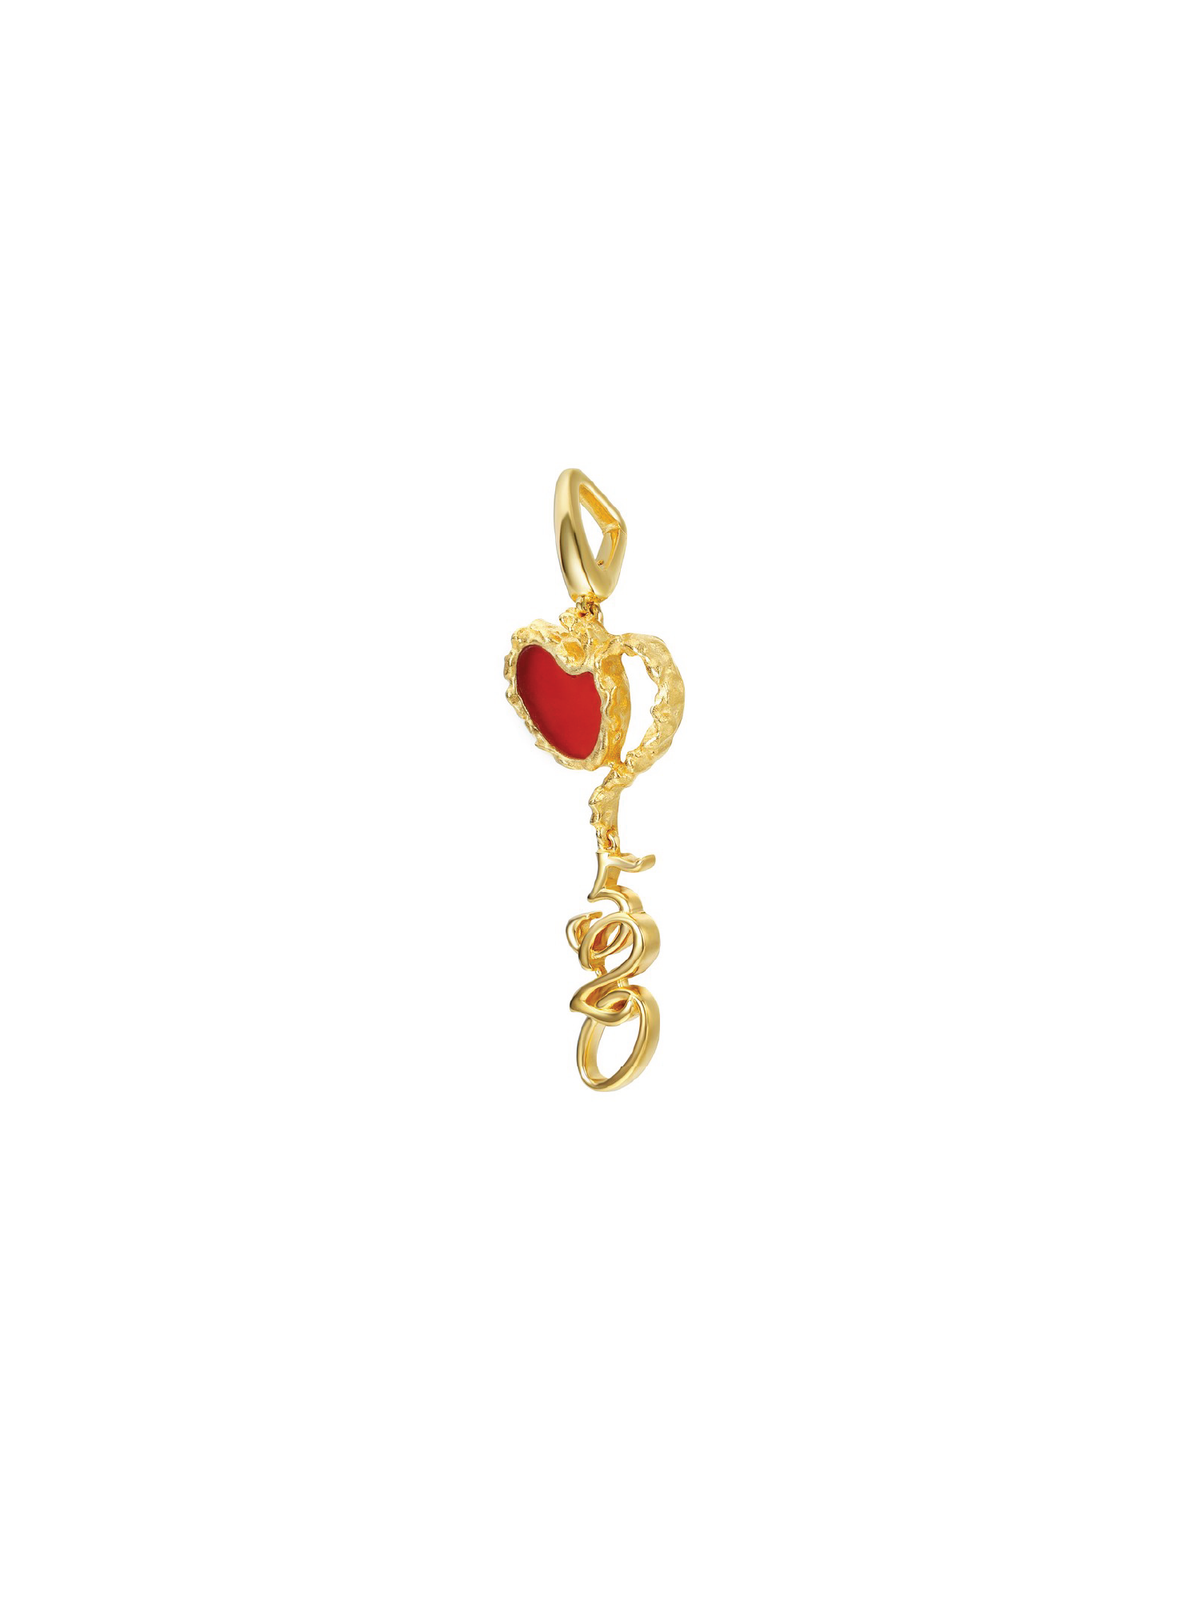 Amore Love Charm - Red